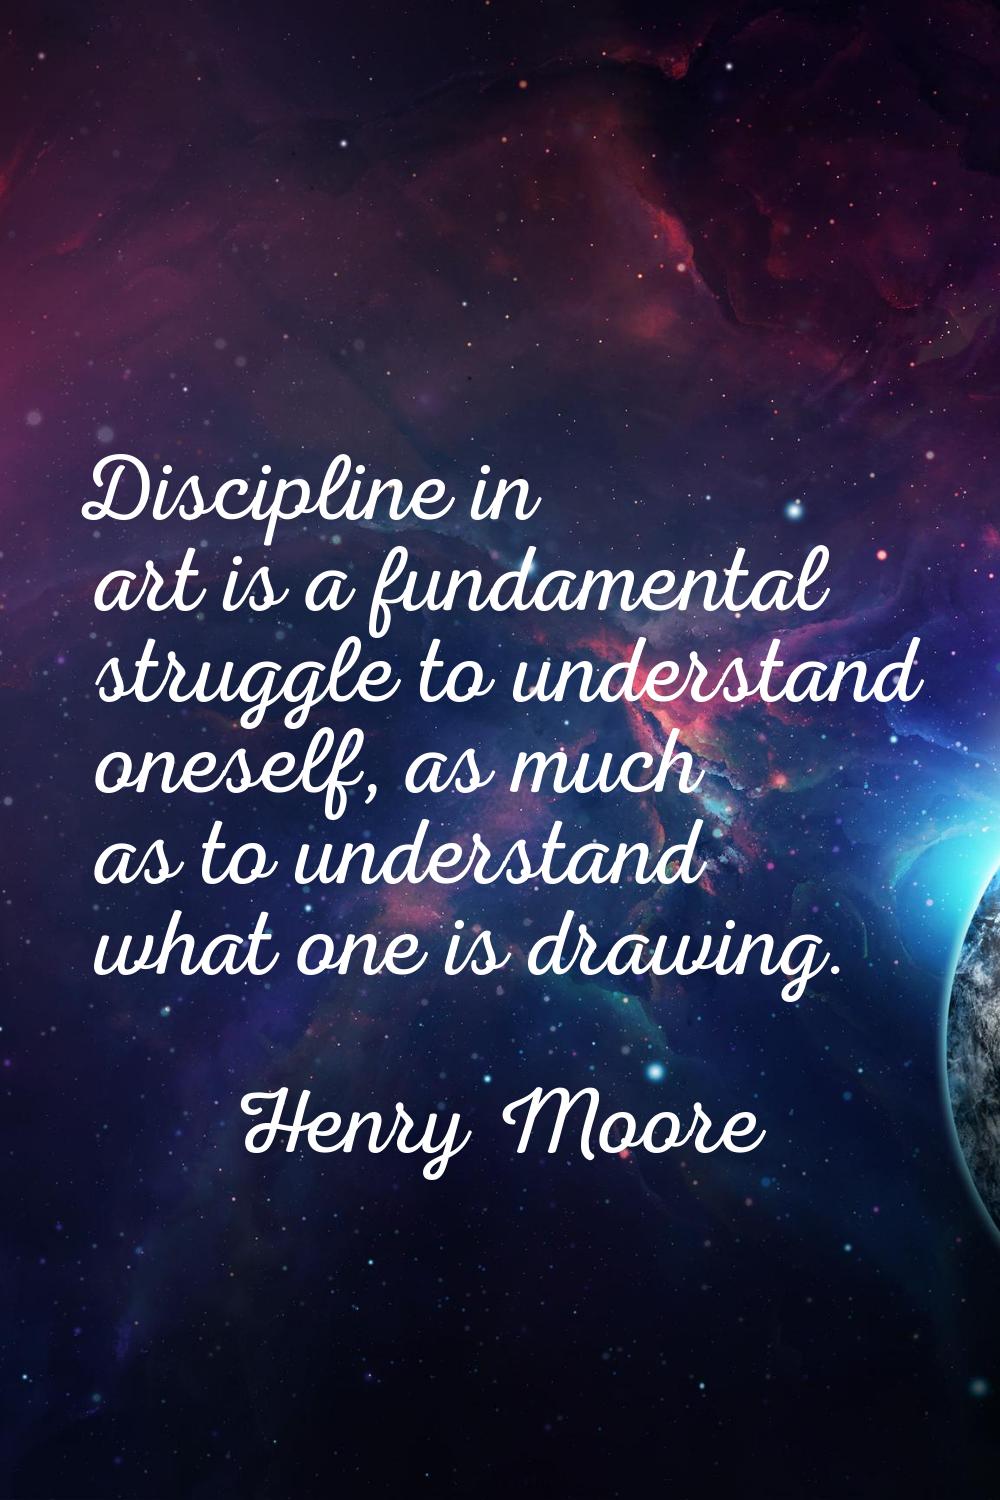 Discipline in art is a fundamental struggle to understand oneself, as much as to understand what on